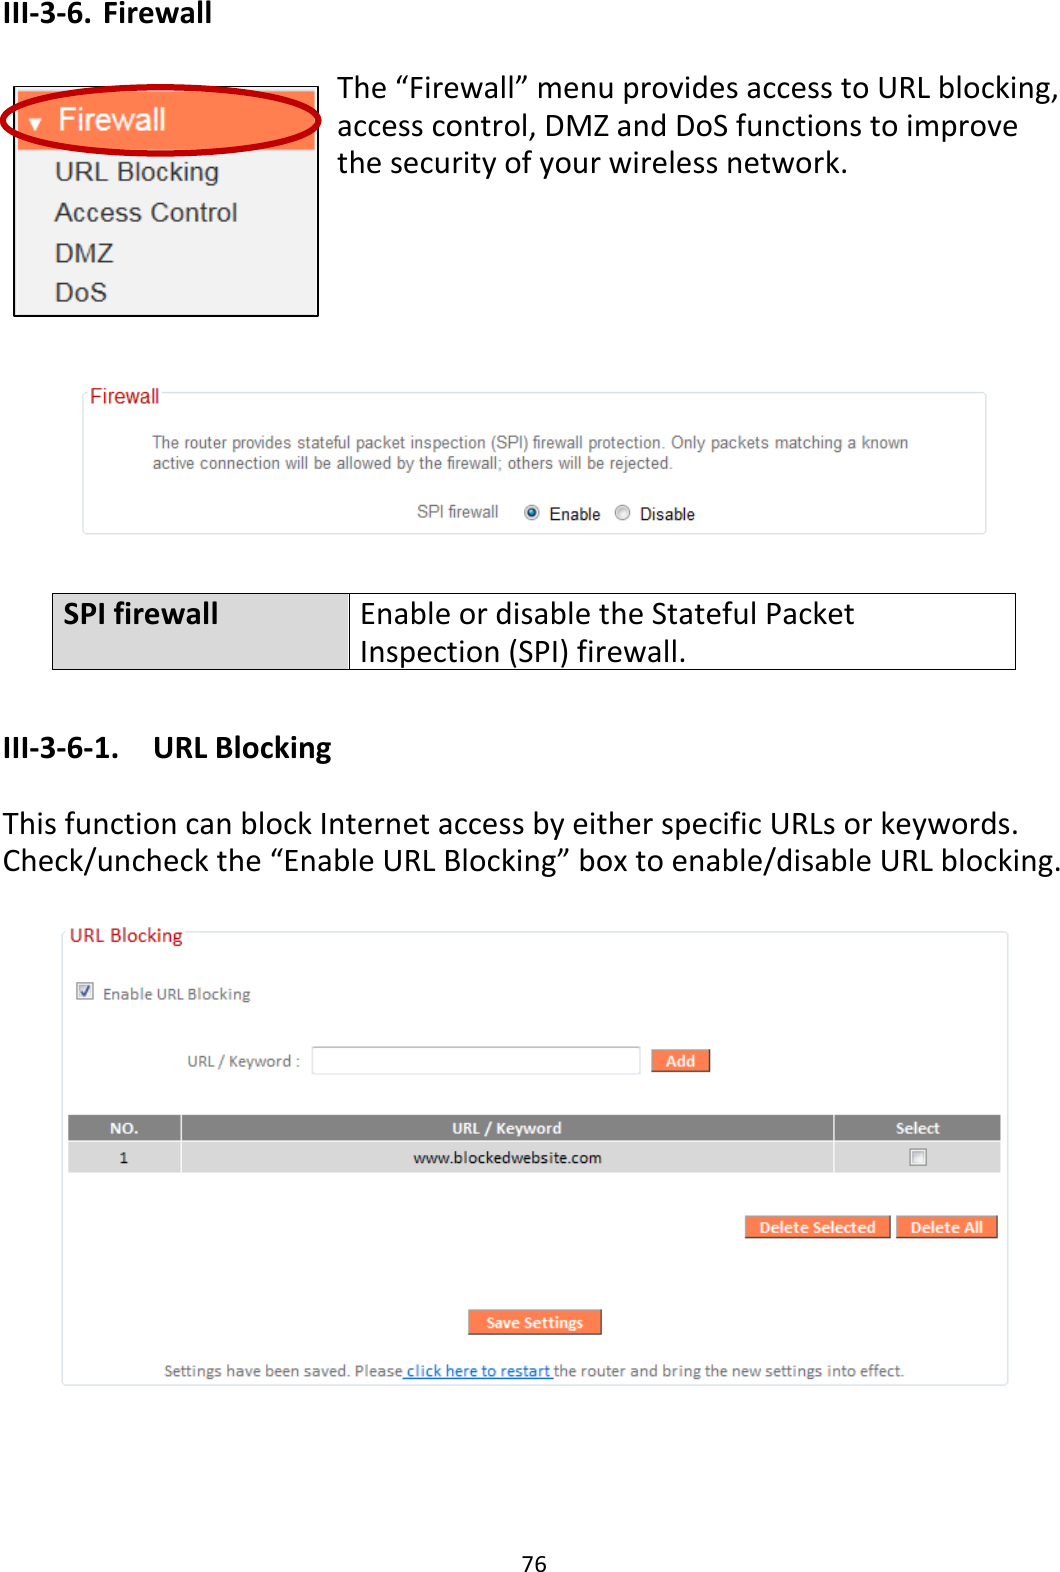 76 III-3-6. Firewall  The “Firewall” menu provides access to URL blocking, access control, DMZ and DoS functions to improve the security of your wireless network.        SPI firewall Enable or disable the Stateful Packet Inspection (SPI) firewall.   III-3-6-1.  URL Blocking  This function can block Internet access by either specific URLs or keywords. Check/uncheck the “Enable URL Blocking” box to enable/disable URL blocking.   